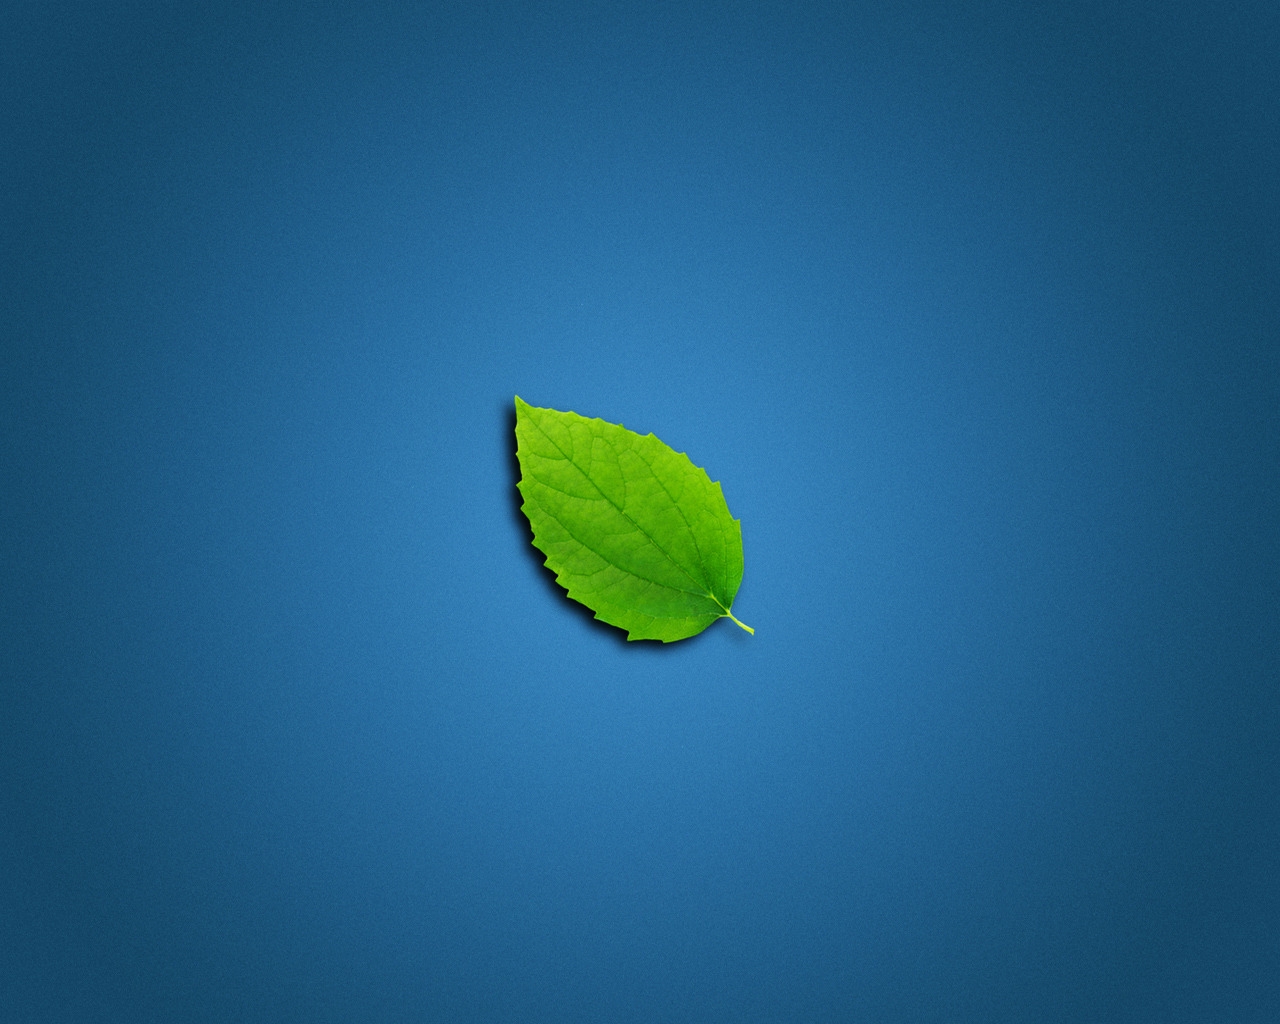 Lonely Leaf for 1280 x 1024 resolution